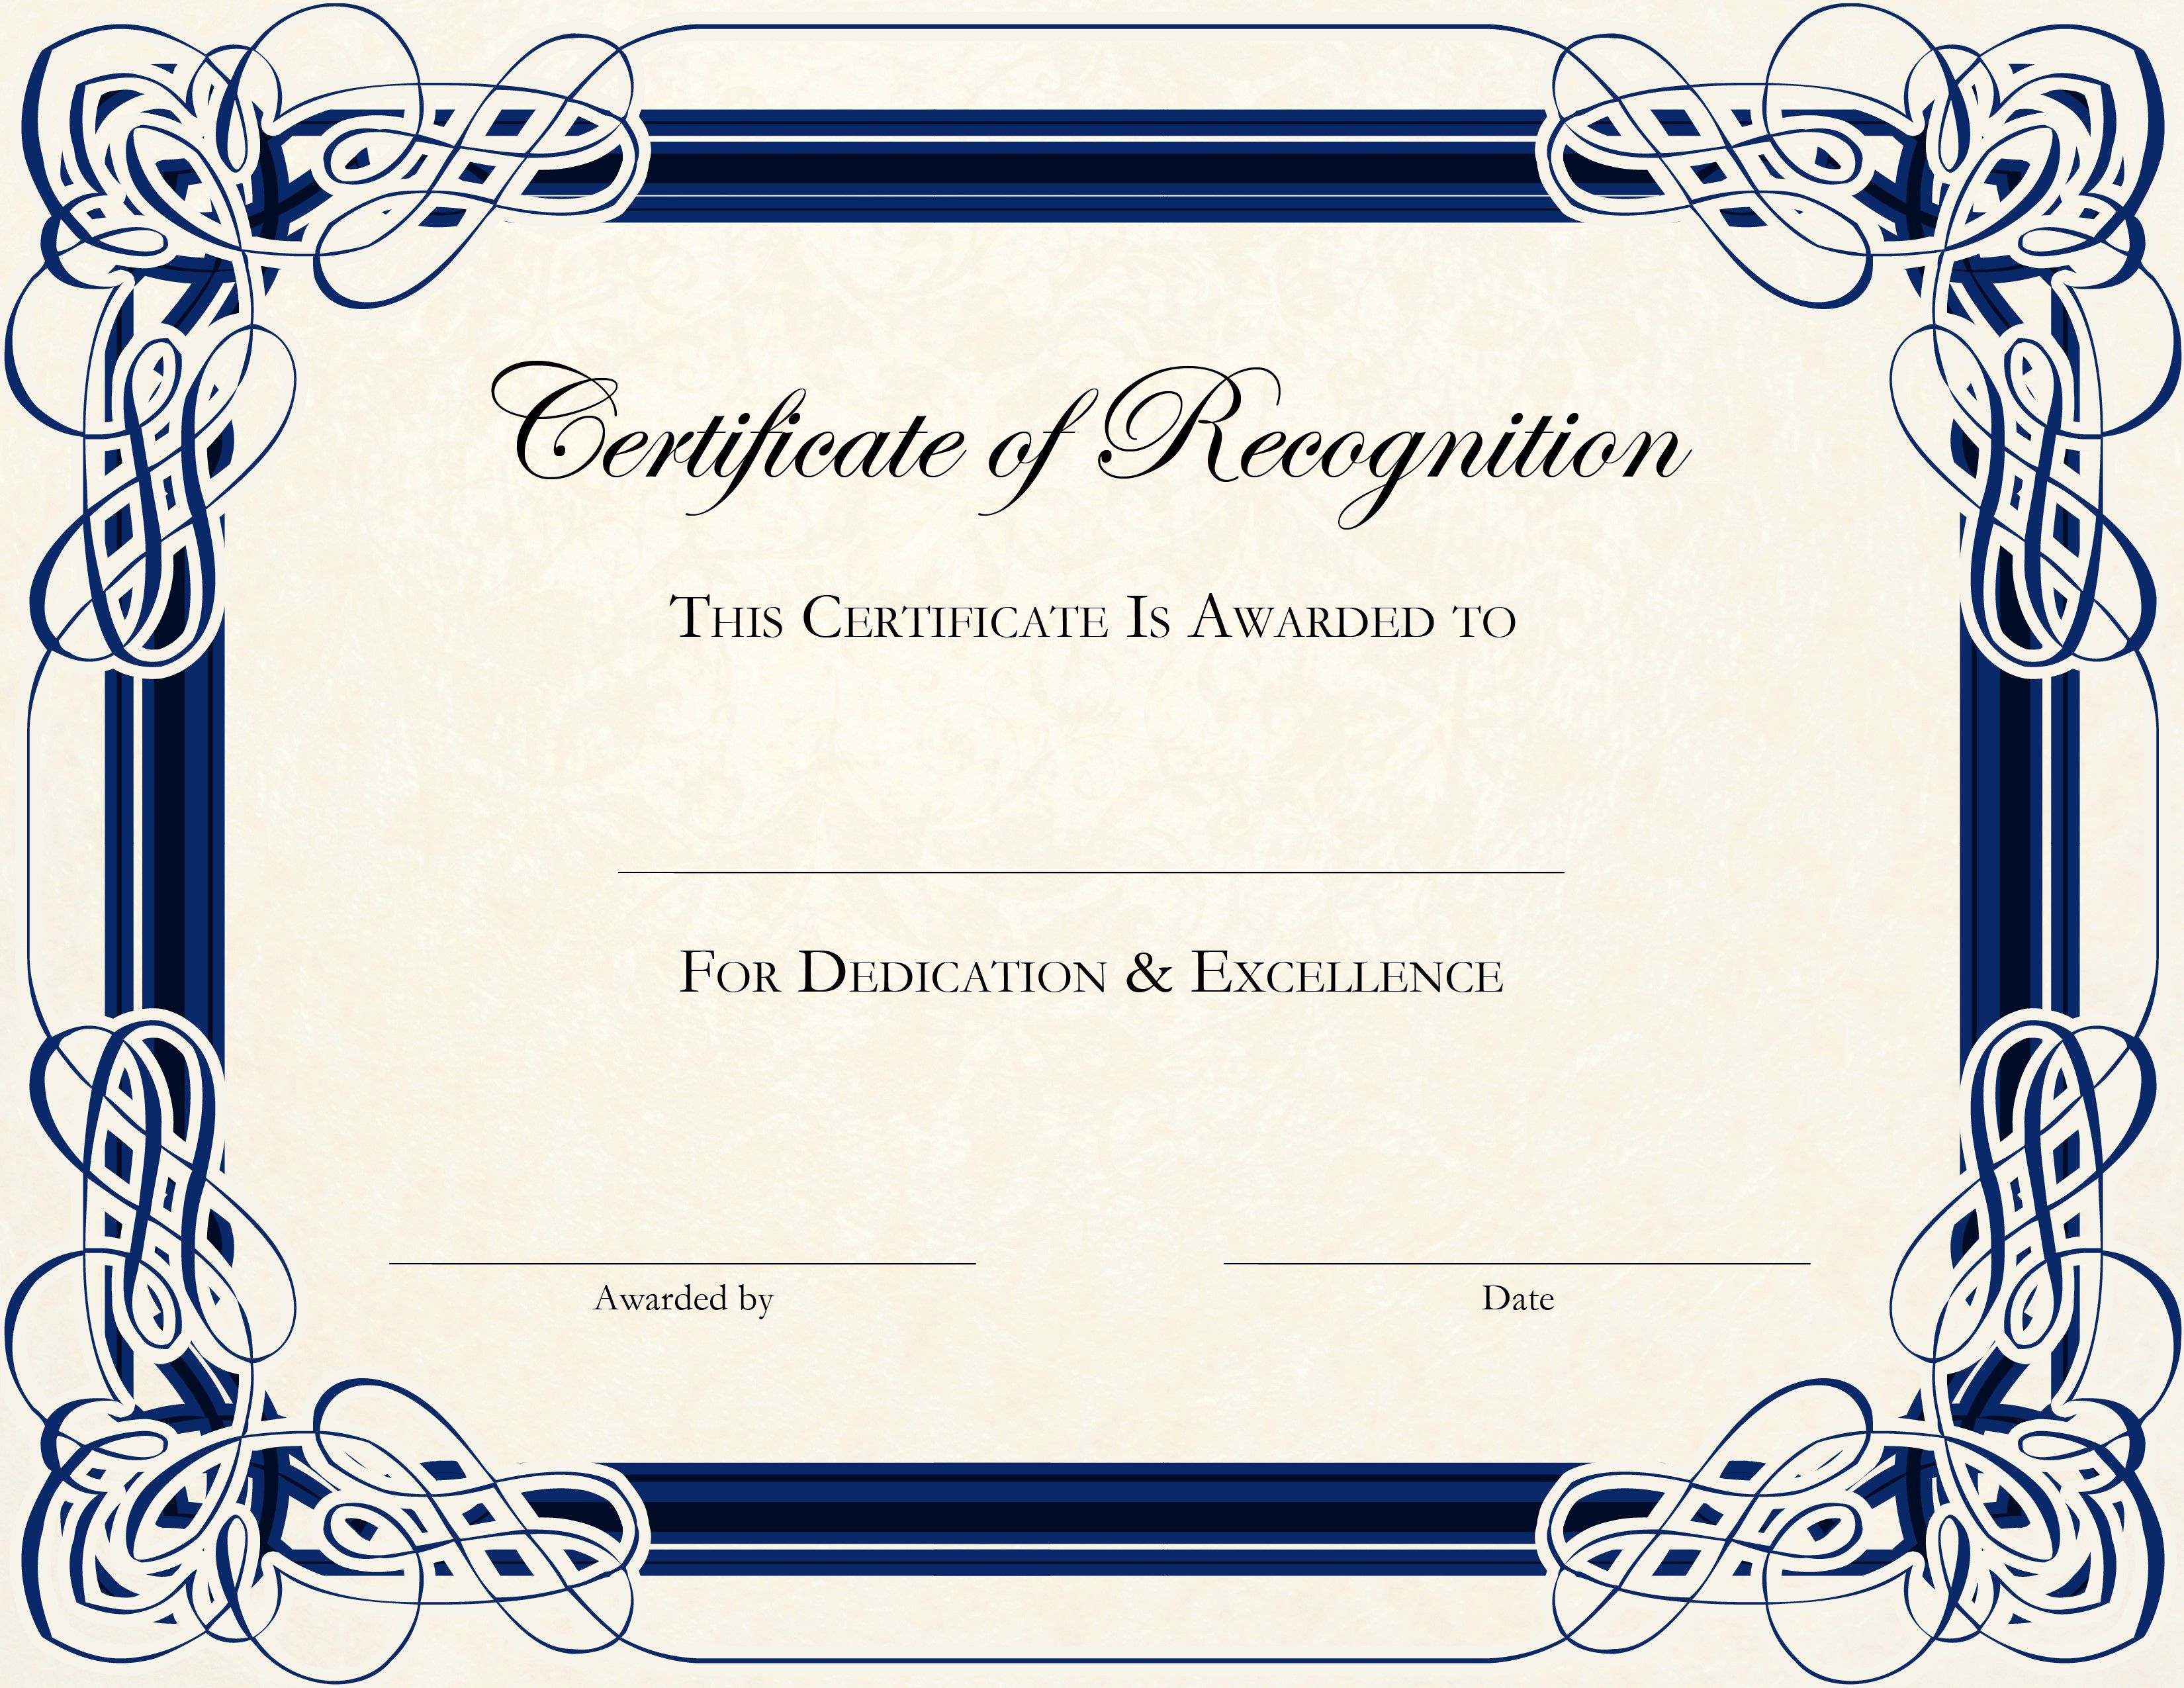 Free Printable Certificate Templates For Teachers | Besttemplate123 - Certificate Of Completion Template Free Printable